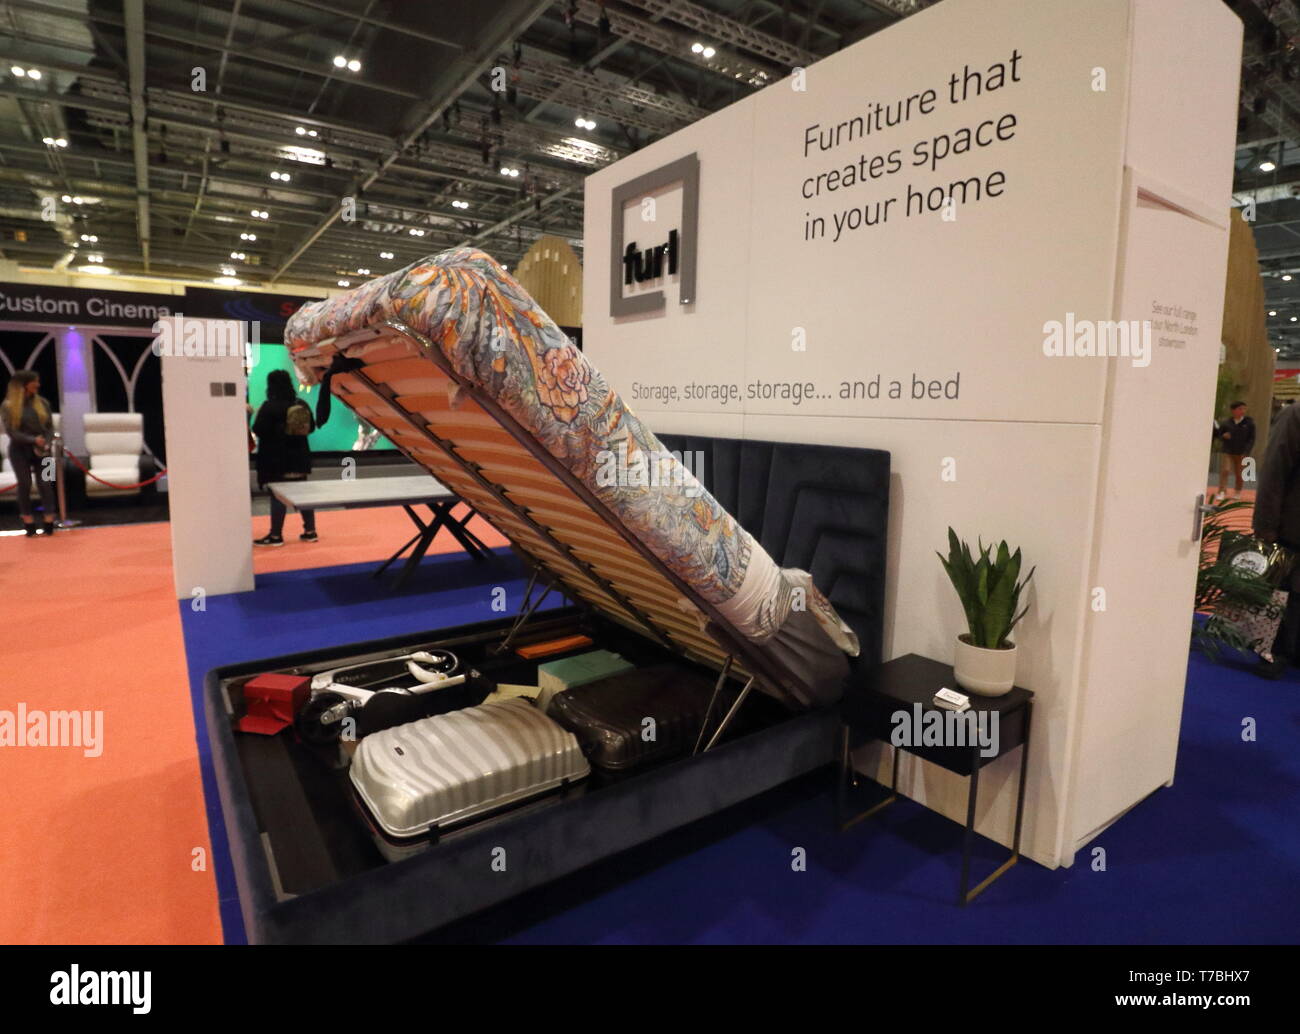 London, UK. 5th May, 2019. Furniture that creates space in your home seen displayed during the exhibition.Grand Designs Live exhibition sponsored by Anglian Home Improvements, with more than 500 exhibitors in zones for sustainable technology, self-build, design, grand technology, interiors, kitchens & bathrooms, gardens, food & housewares. The show offers visitors a unique opportunity to see all the latest trends for the home as well as many products never seen before. Based on the Channel 4 TV series and held at Excel London. (Credit Image: © Keith Mayhew/SOPA Images via ZUMA Wir Stock Photo